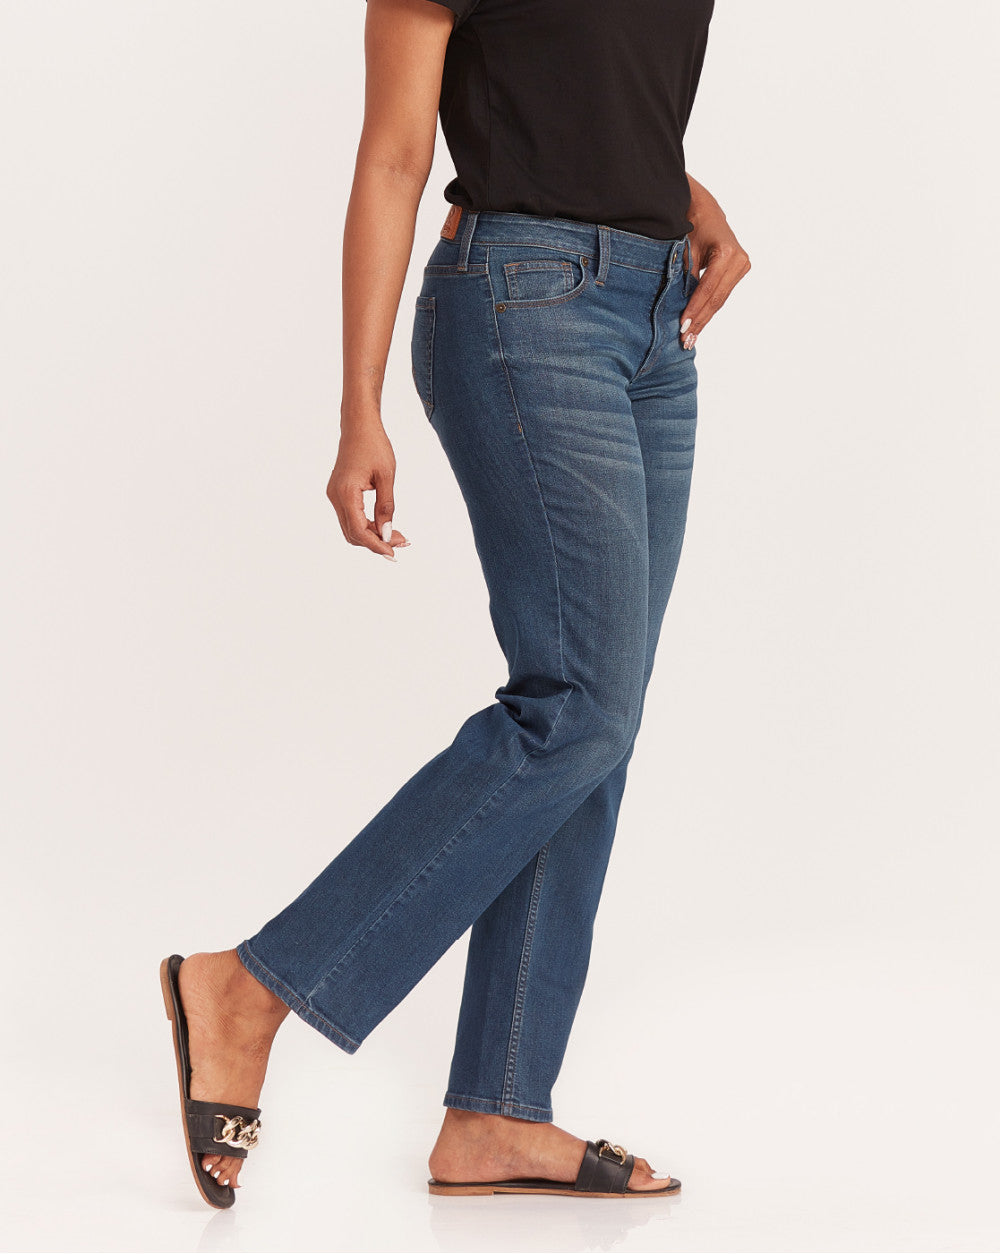 Straight Fit Waist Jeans - Classic Blue